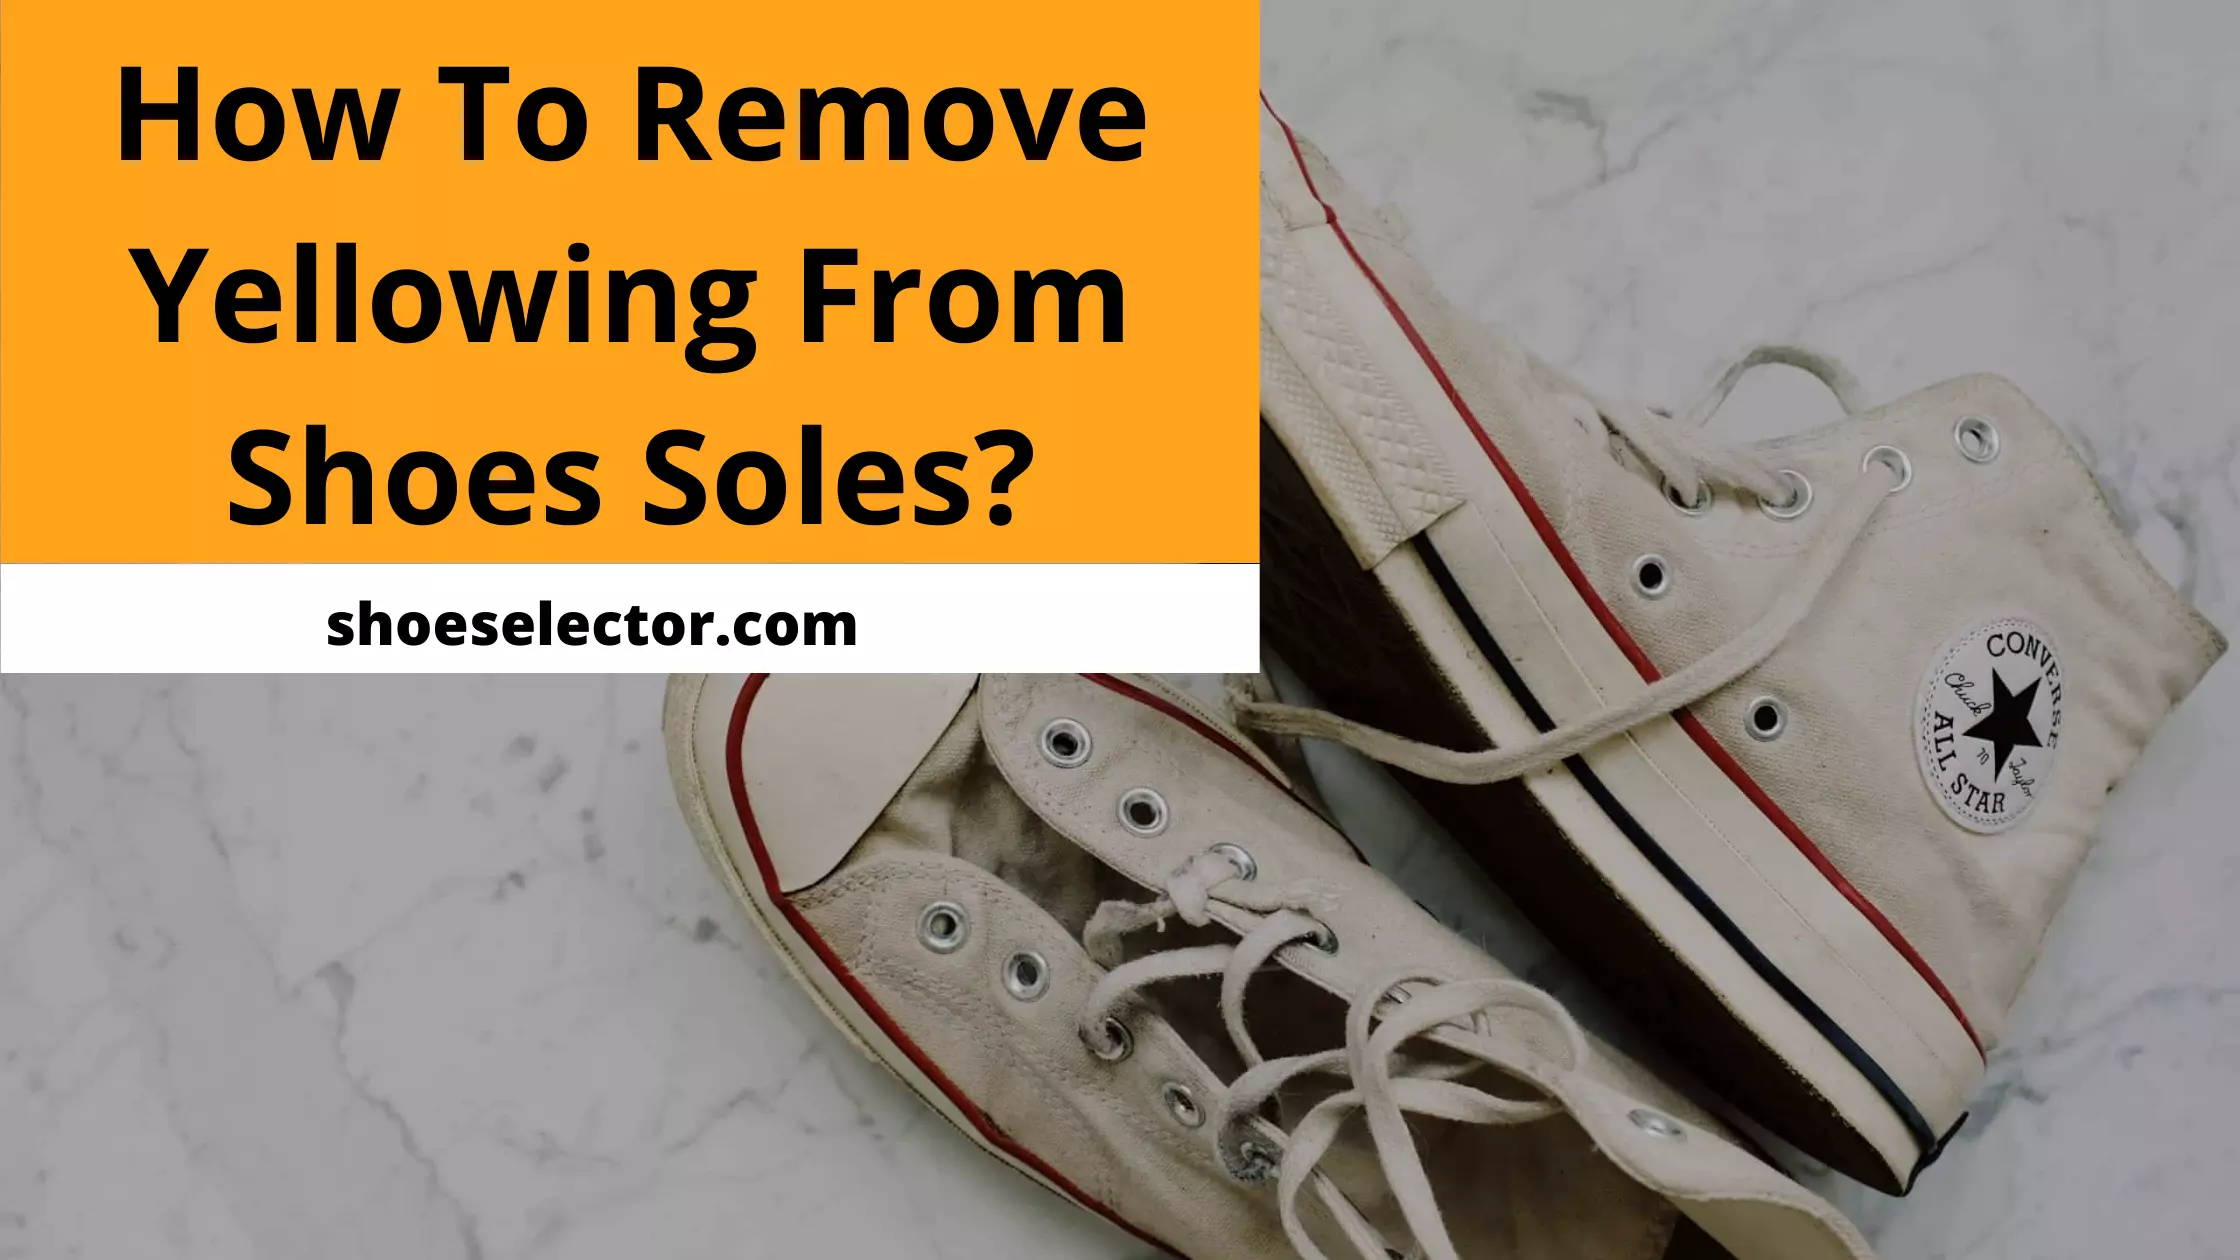 How To Remove Yellowing From Shoe Soles? - Quick Guide